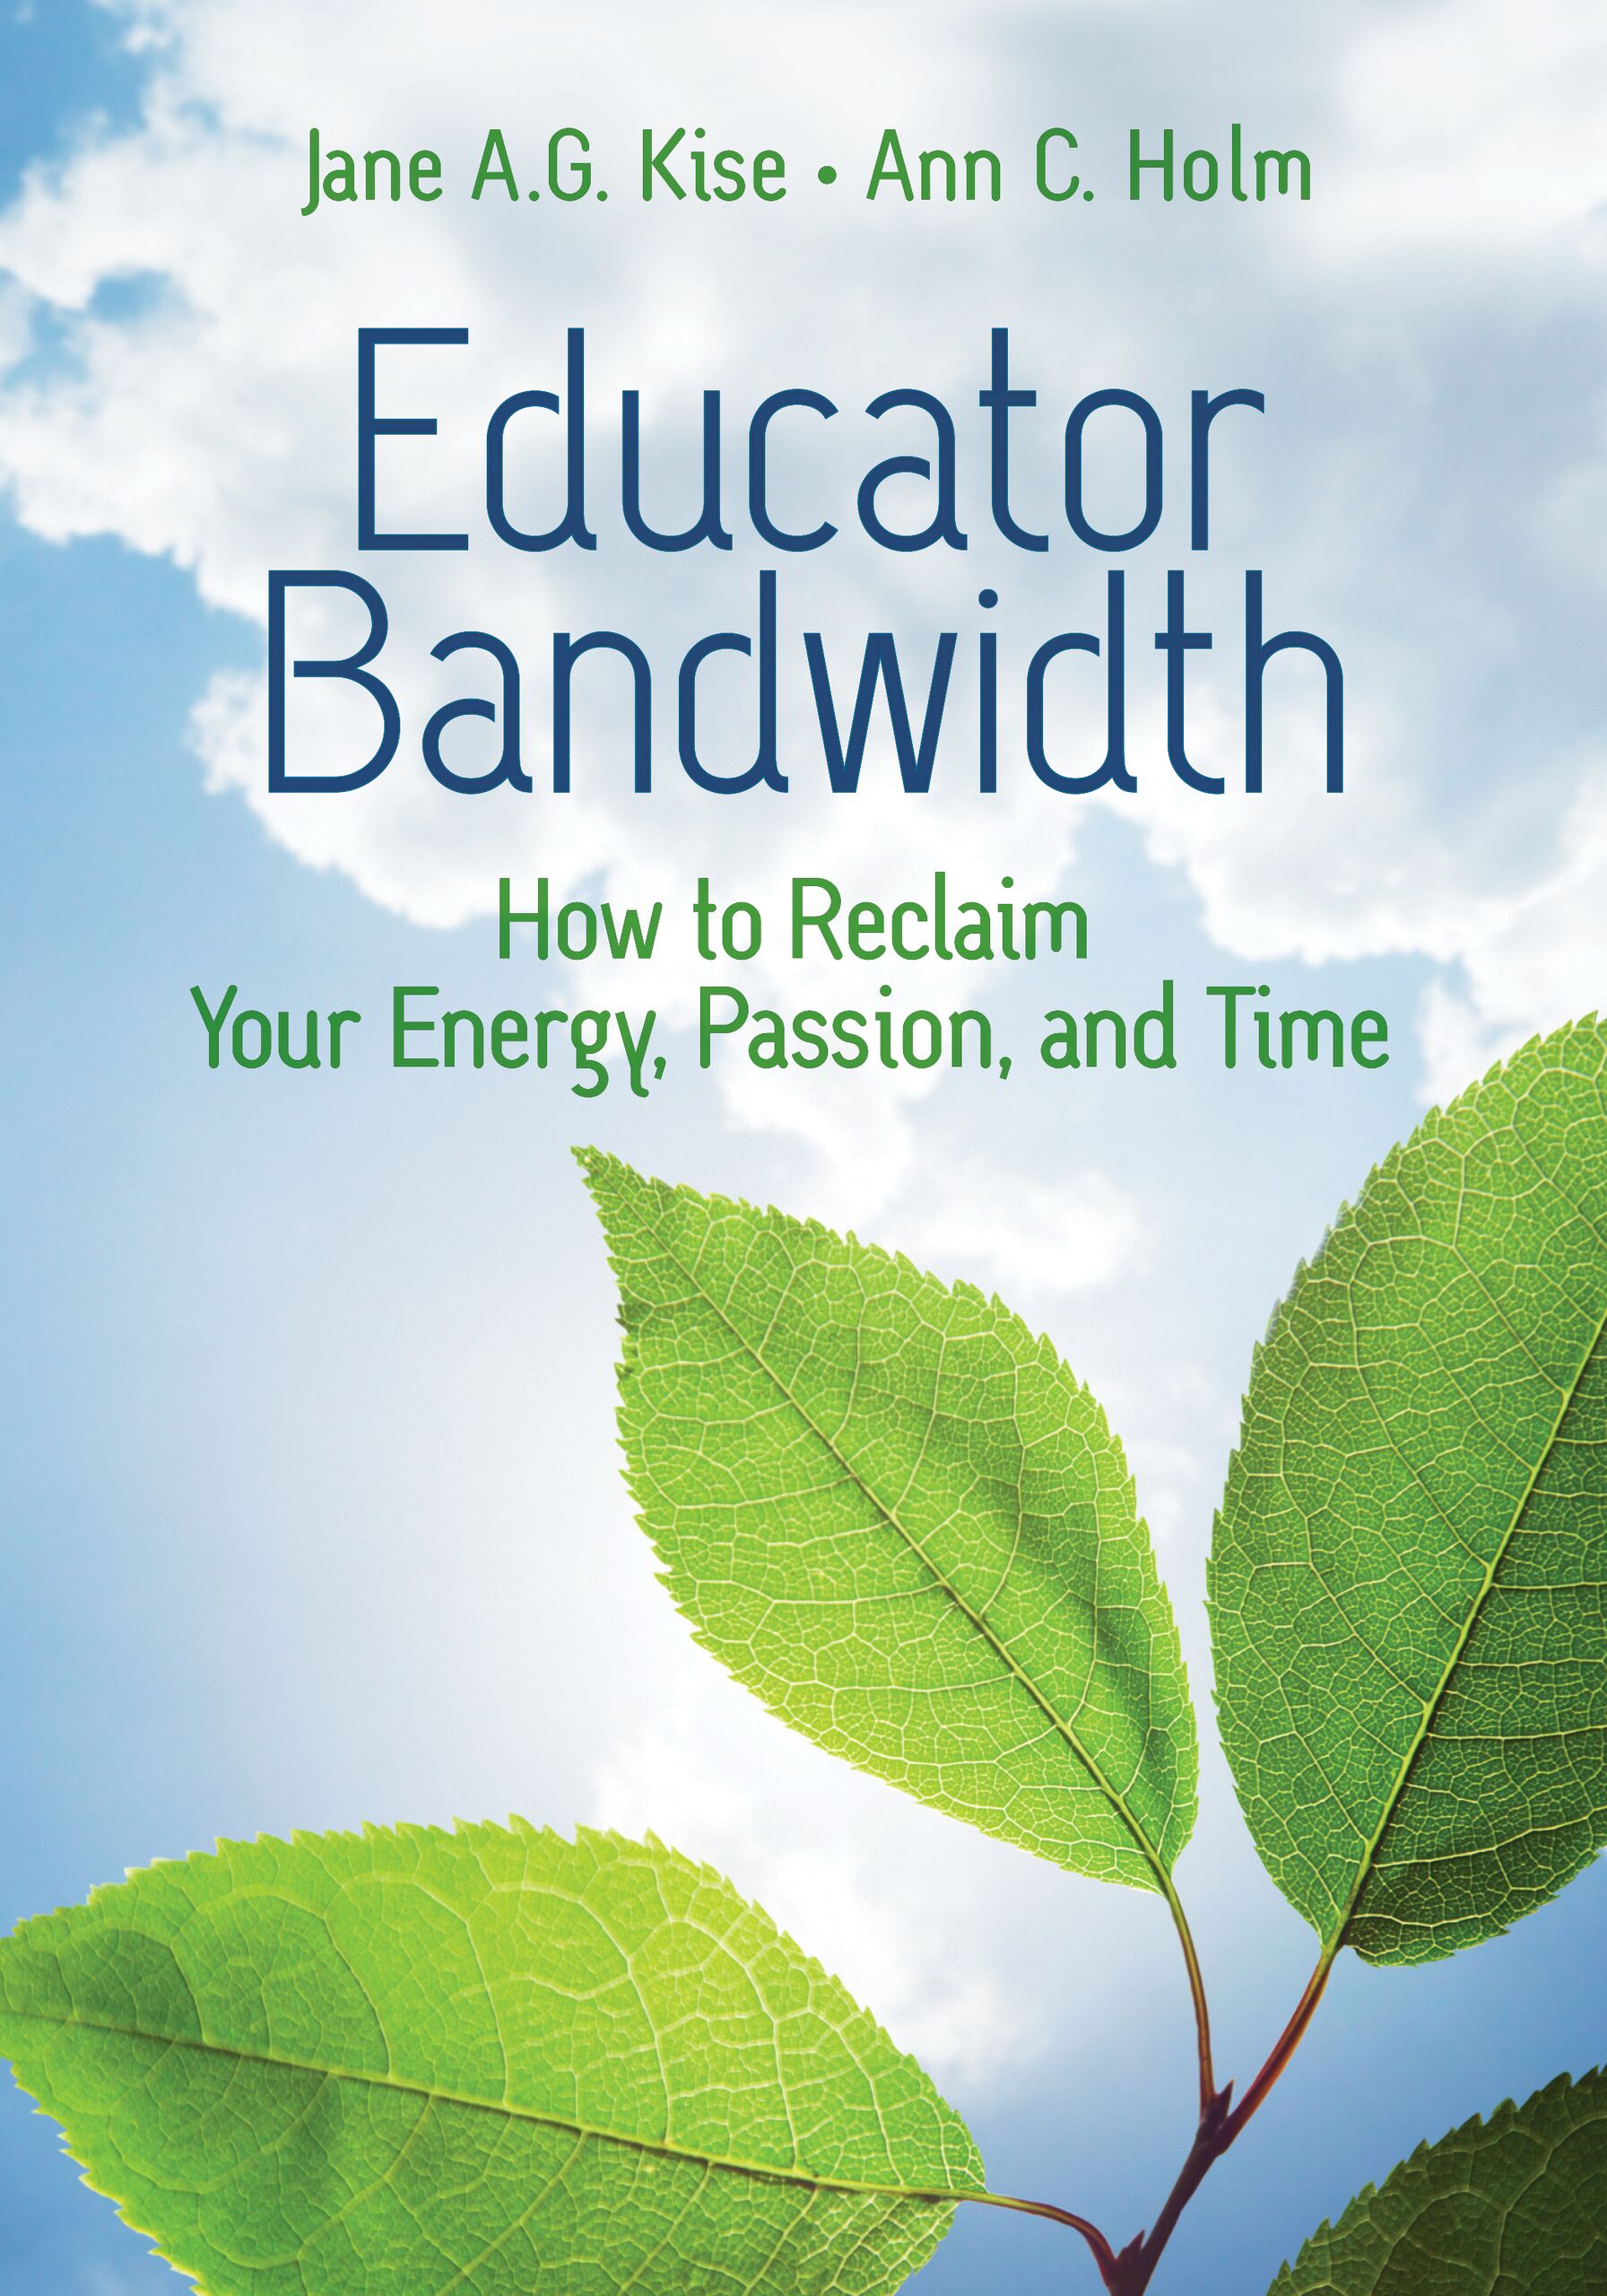 Educator Bandwidth - How to Reclaim Your Energy, Passion, and Time - Jane Kise